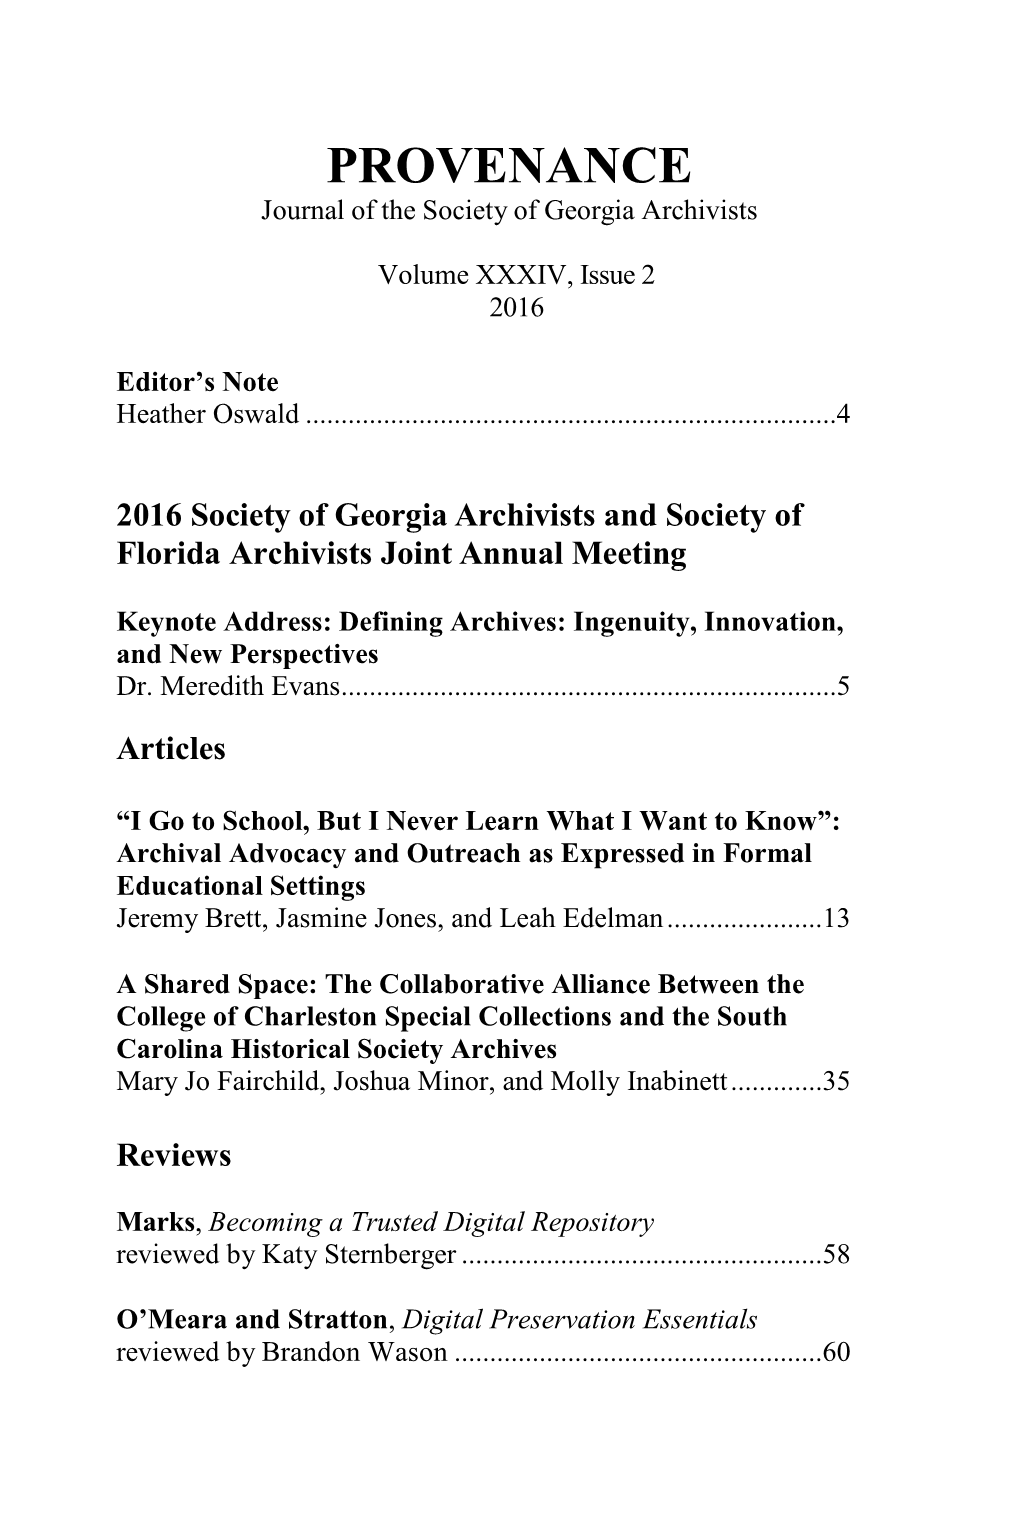 PROVENANCE Journal of the Society of Georgia Archivists